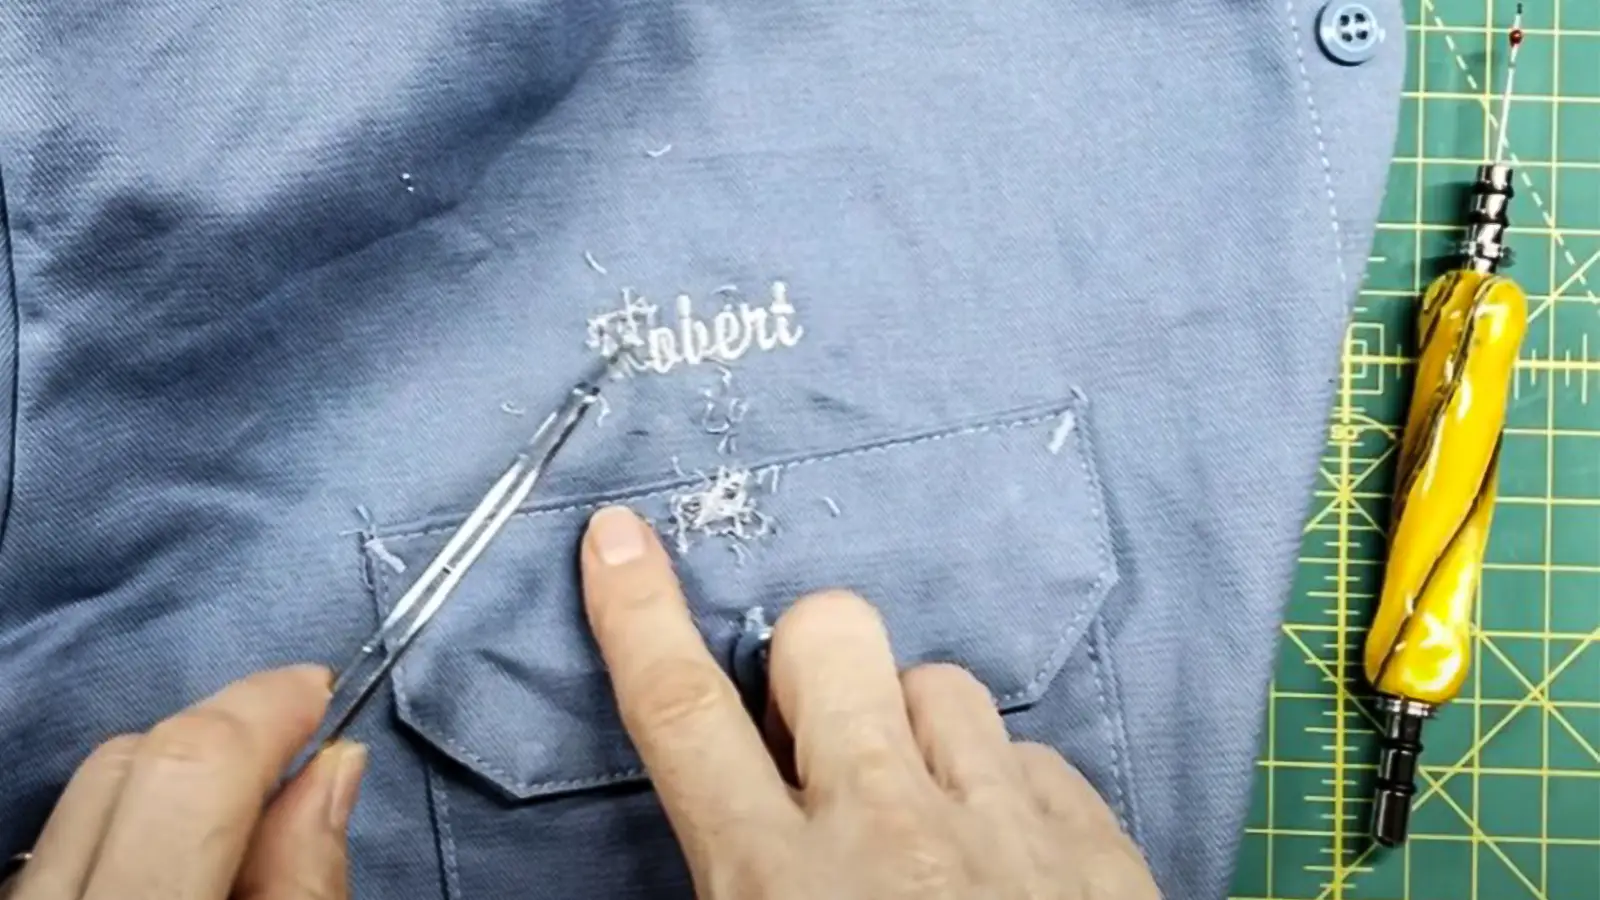 How to Get Embroidery Off: A Guide to Removing Embroidery from Fabric